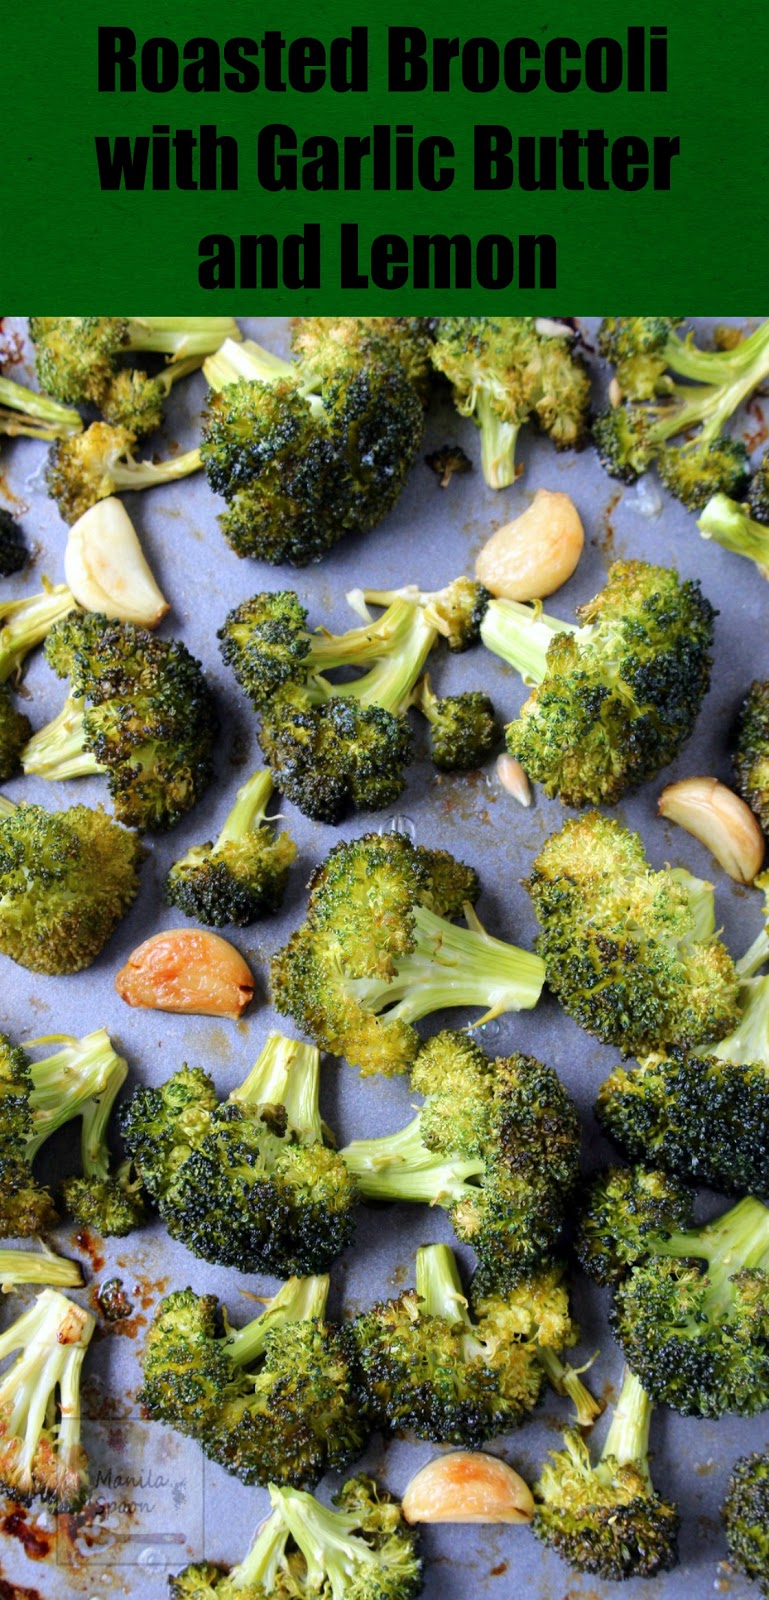 Garlicky, buttery, lemony and so tasty are these roasted broccoli florets! Quick and easy to make, low-carb and naturally gluten-free! | manilaspoon.com